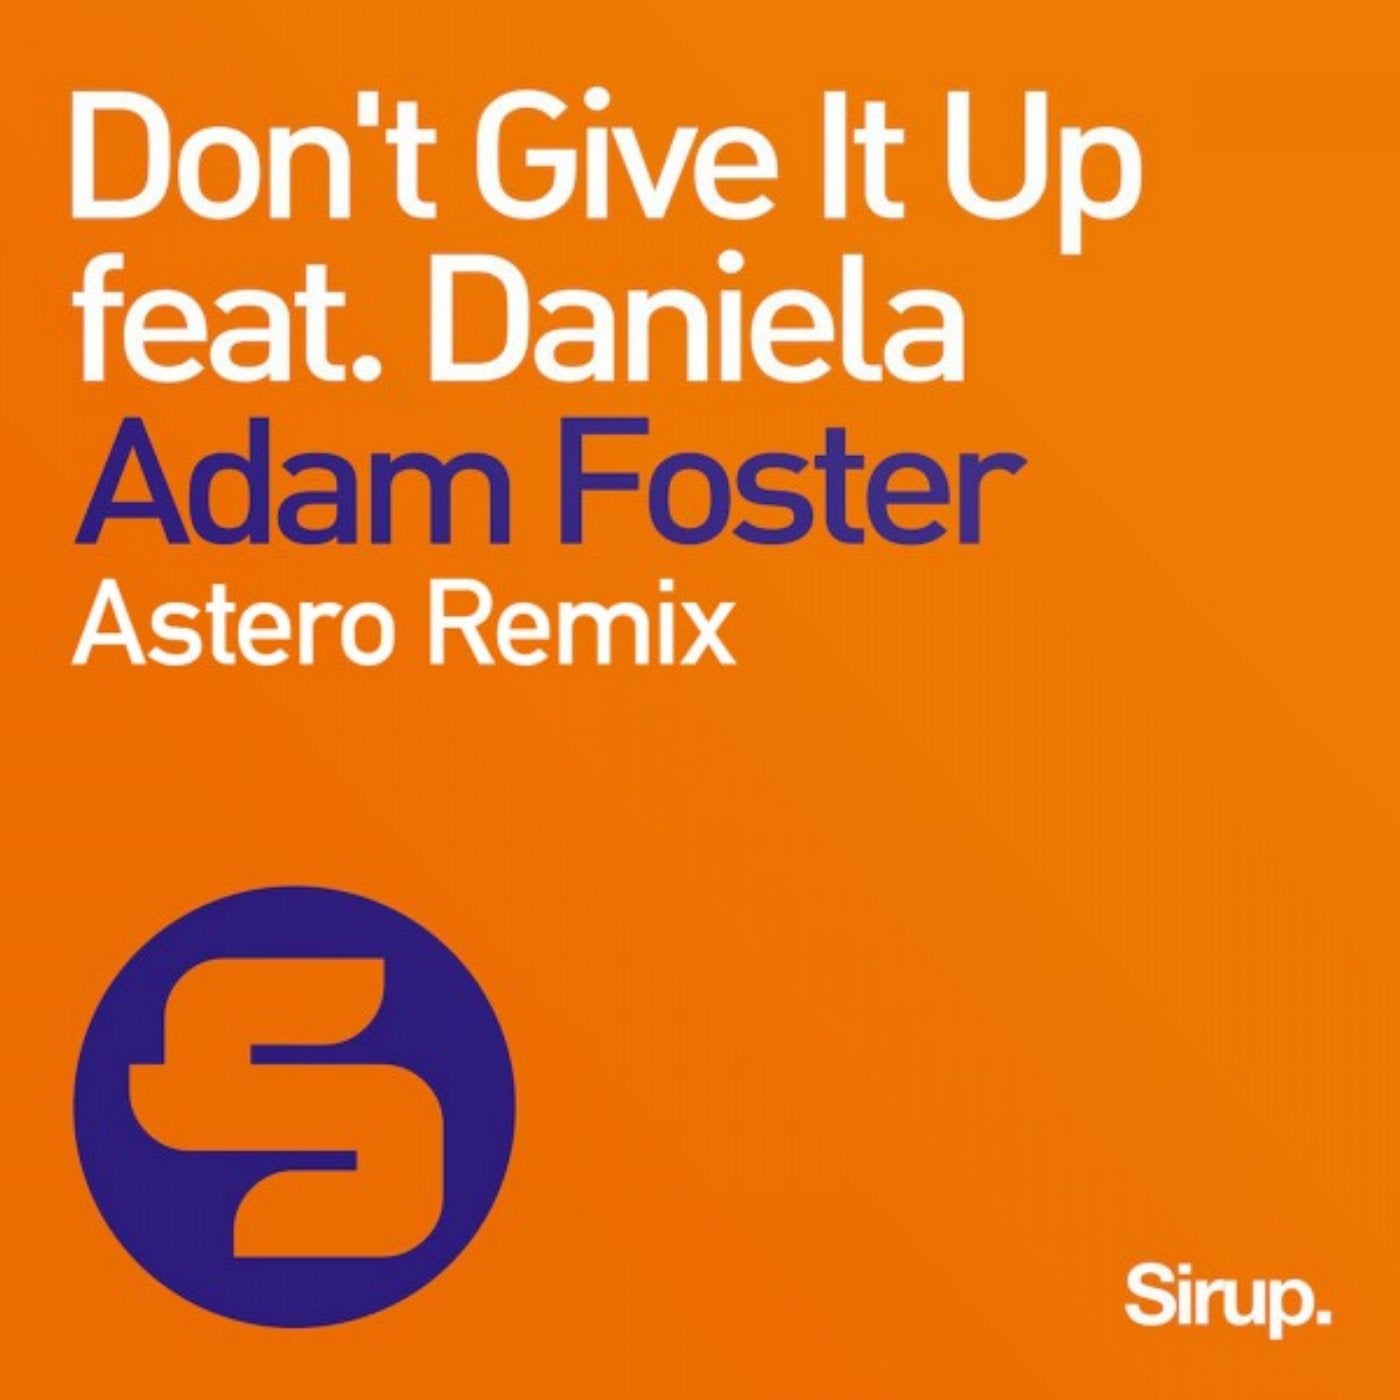 Don't Give It Up (Feat. Daniela)